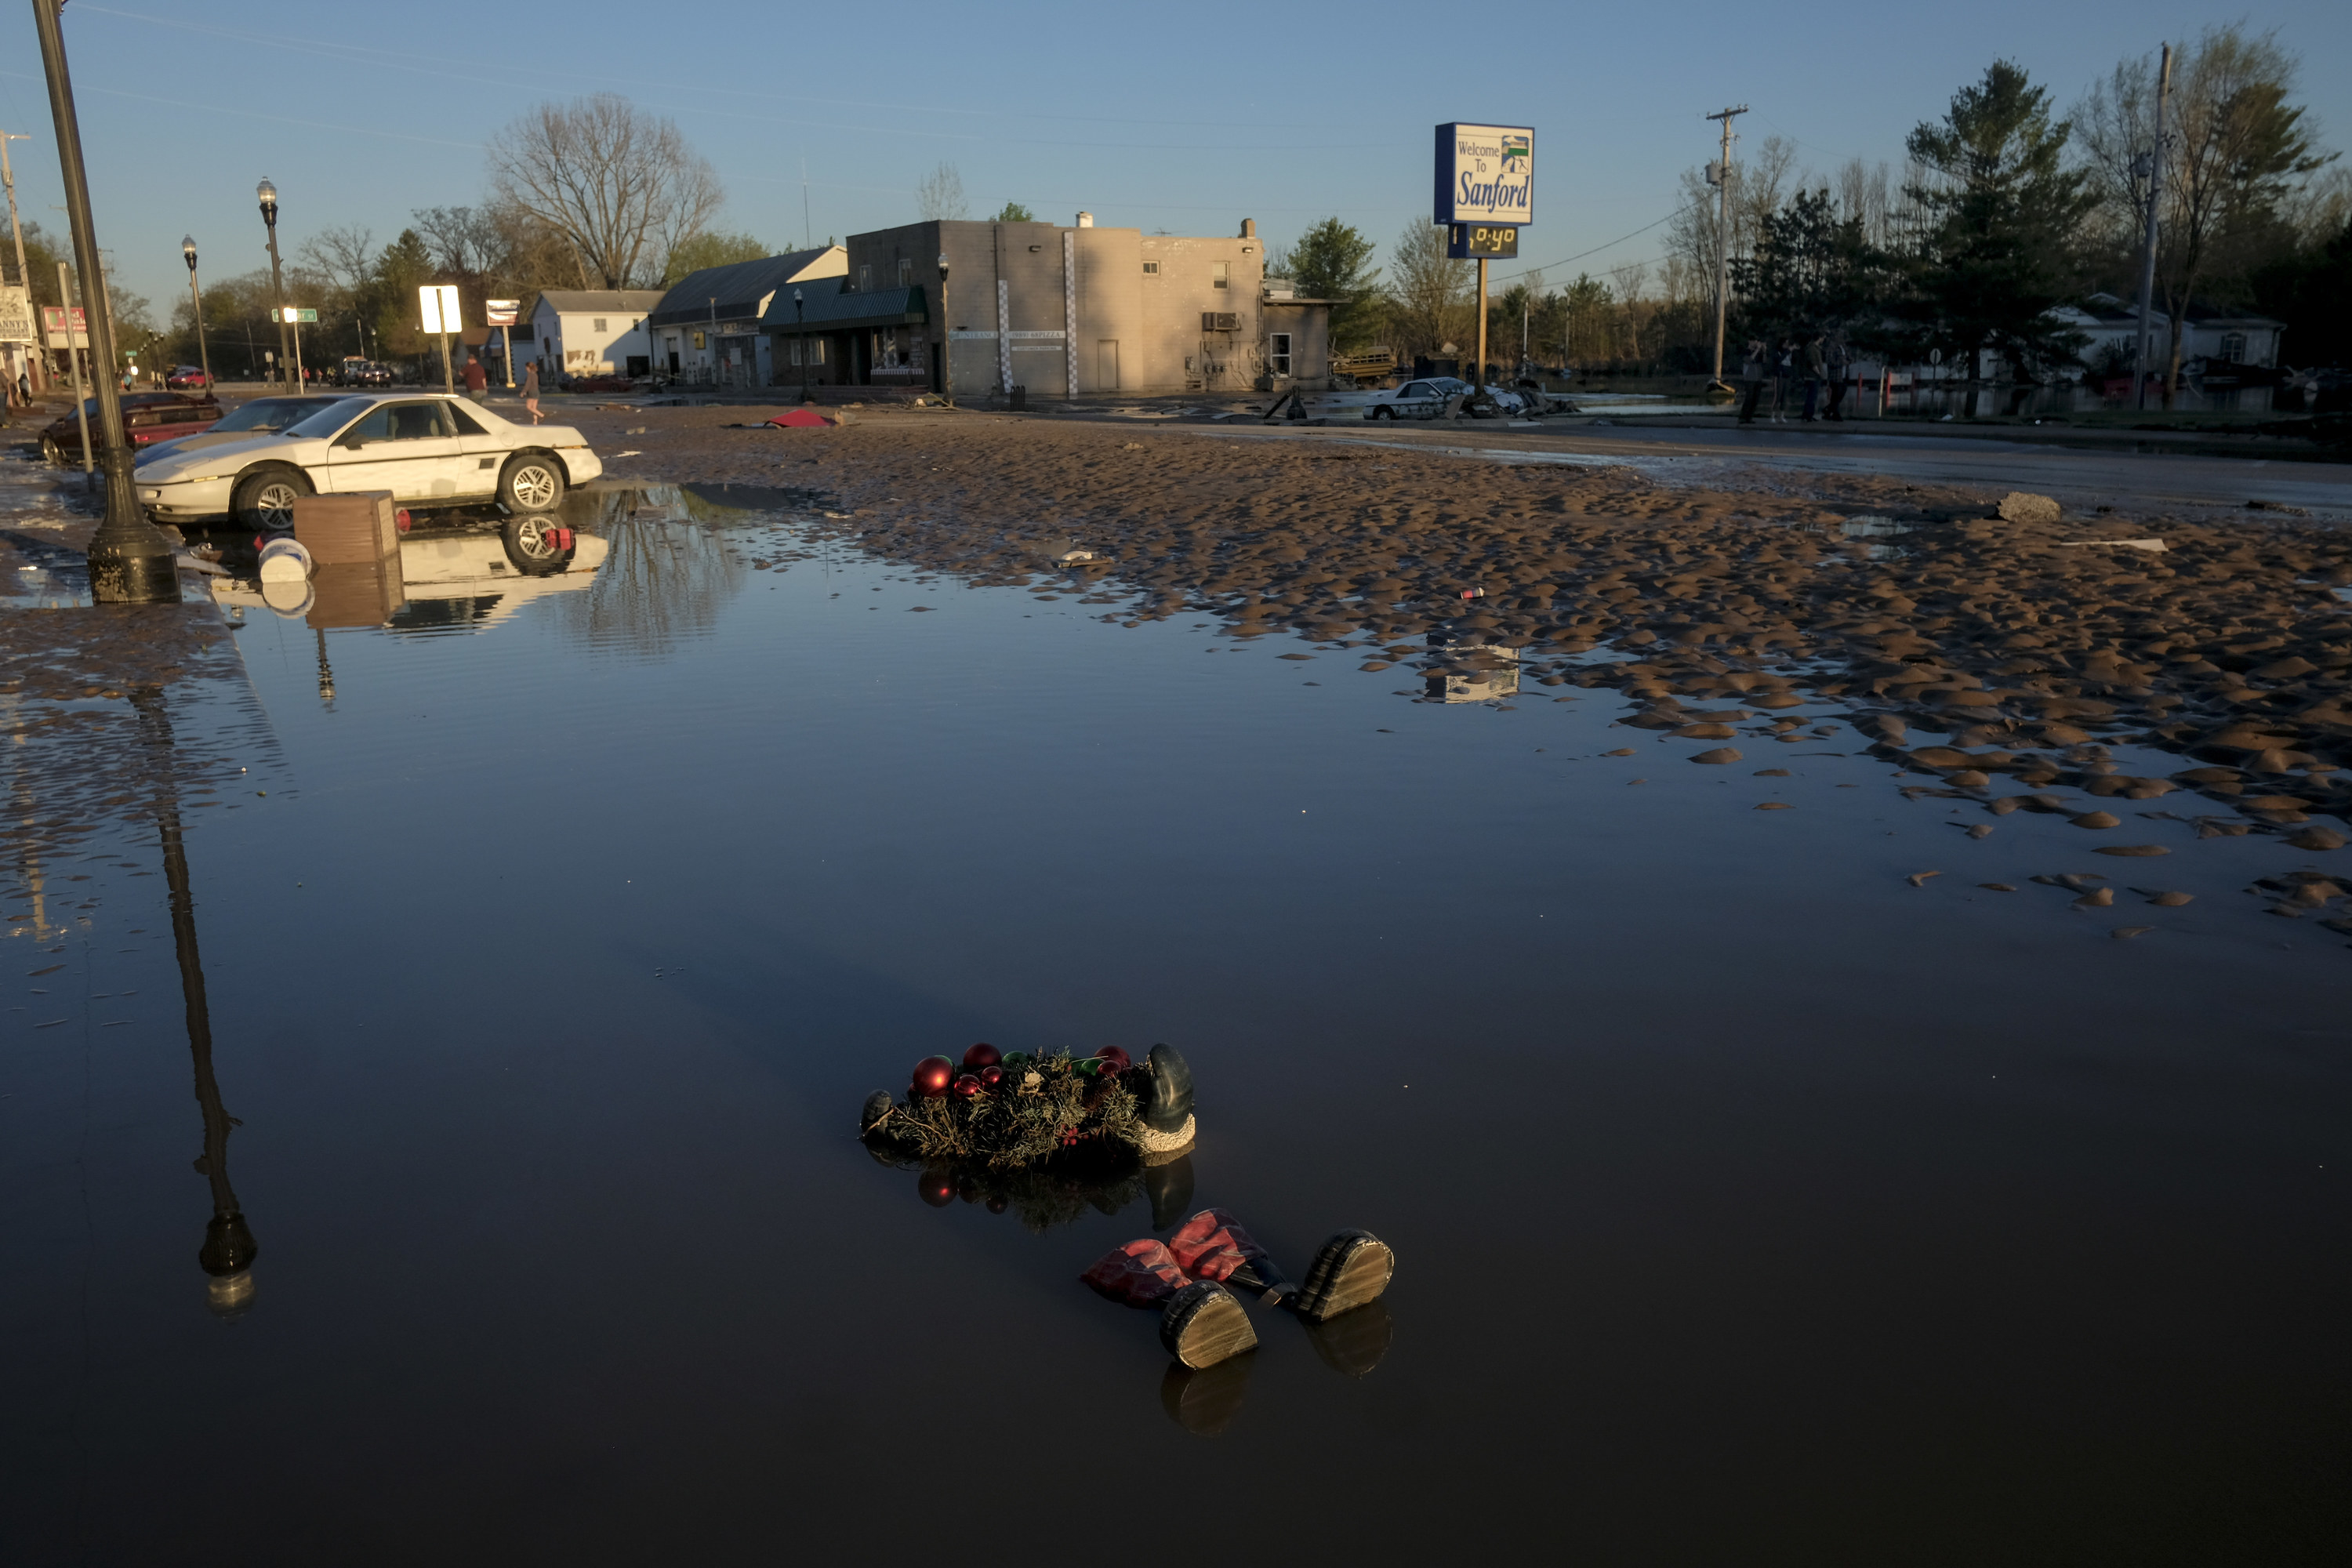 Dramatic Photos Show Flooding In Michigan After Dams Break